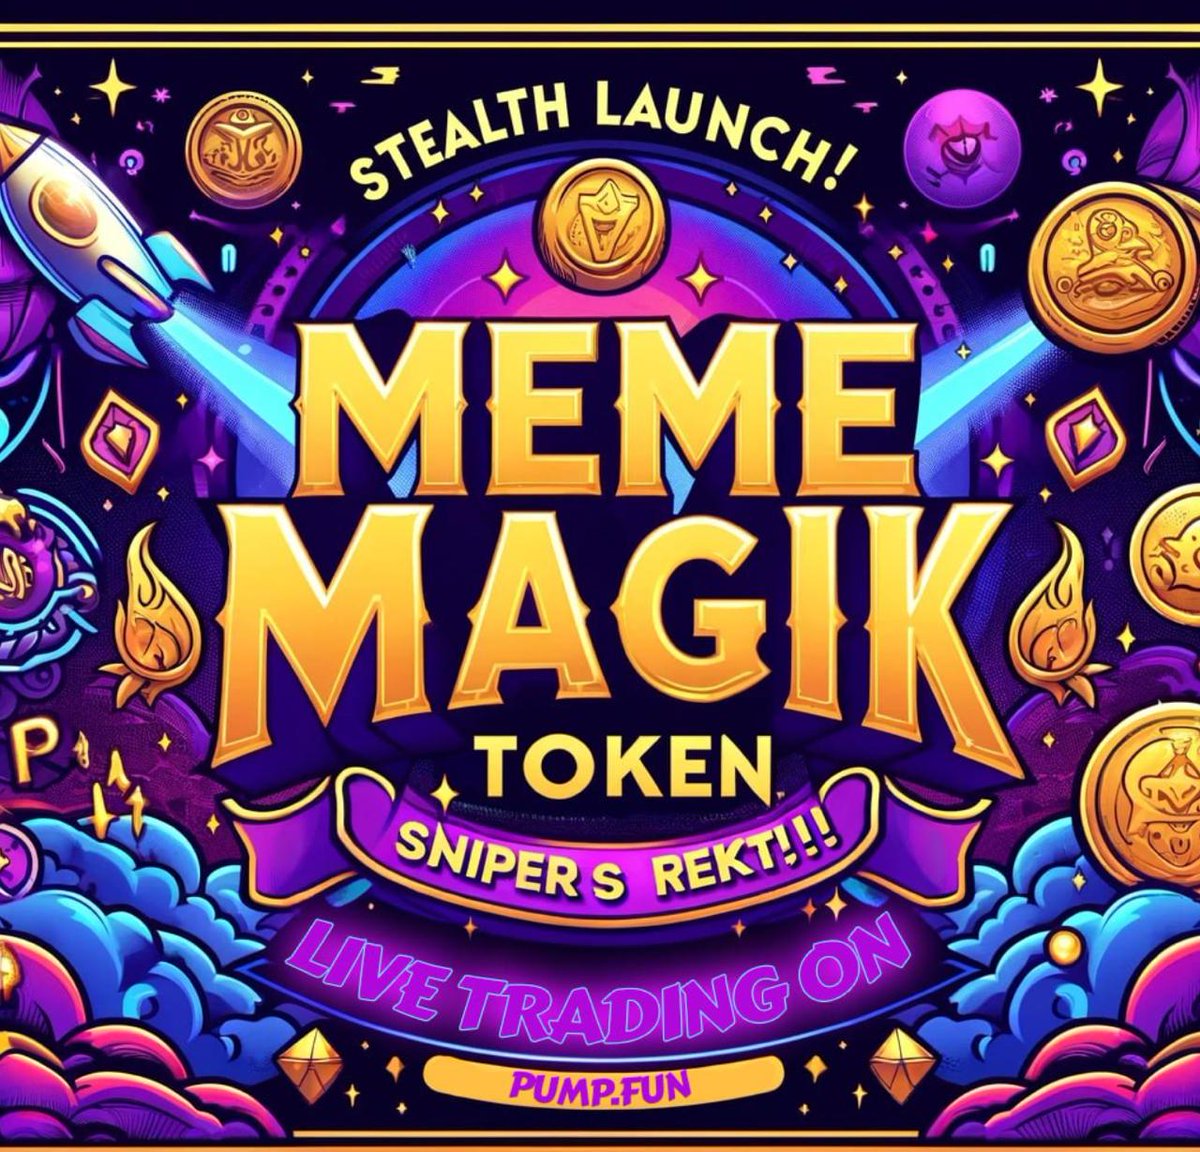 🚨🔥 ATTENTION ALL DEGENS! 🚨🔥 The stealth launch you've been waiting for is here! Dive into the magik with $MMGK on Pump.fun and secure your spot on the ground floor of this fairlaunch! 💥✨ Don’t miss your chance to ride the wave to many x’s! 🌊🚀 🔗